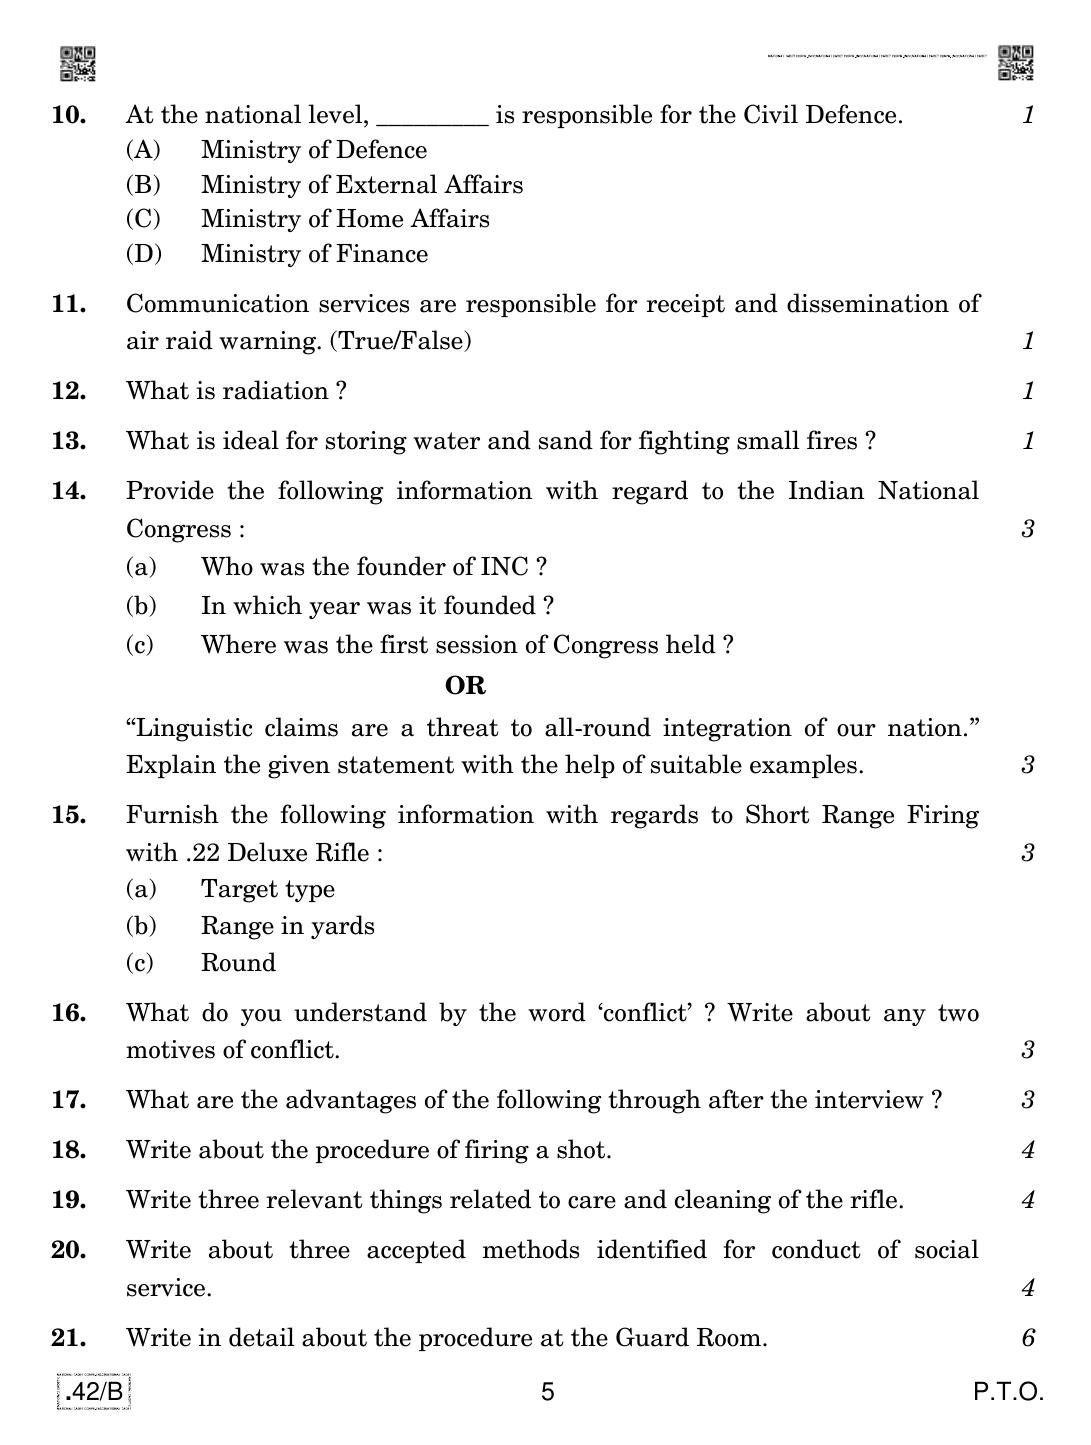 CBSE Class 12 NCC 2020 Compartment Question Paper - Page 5